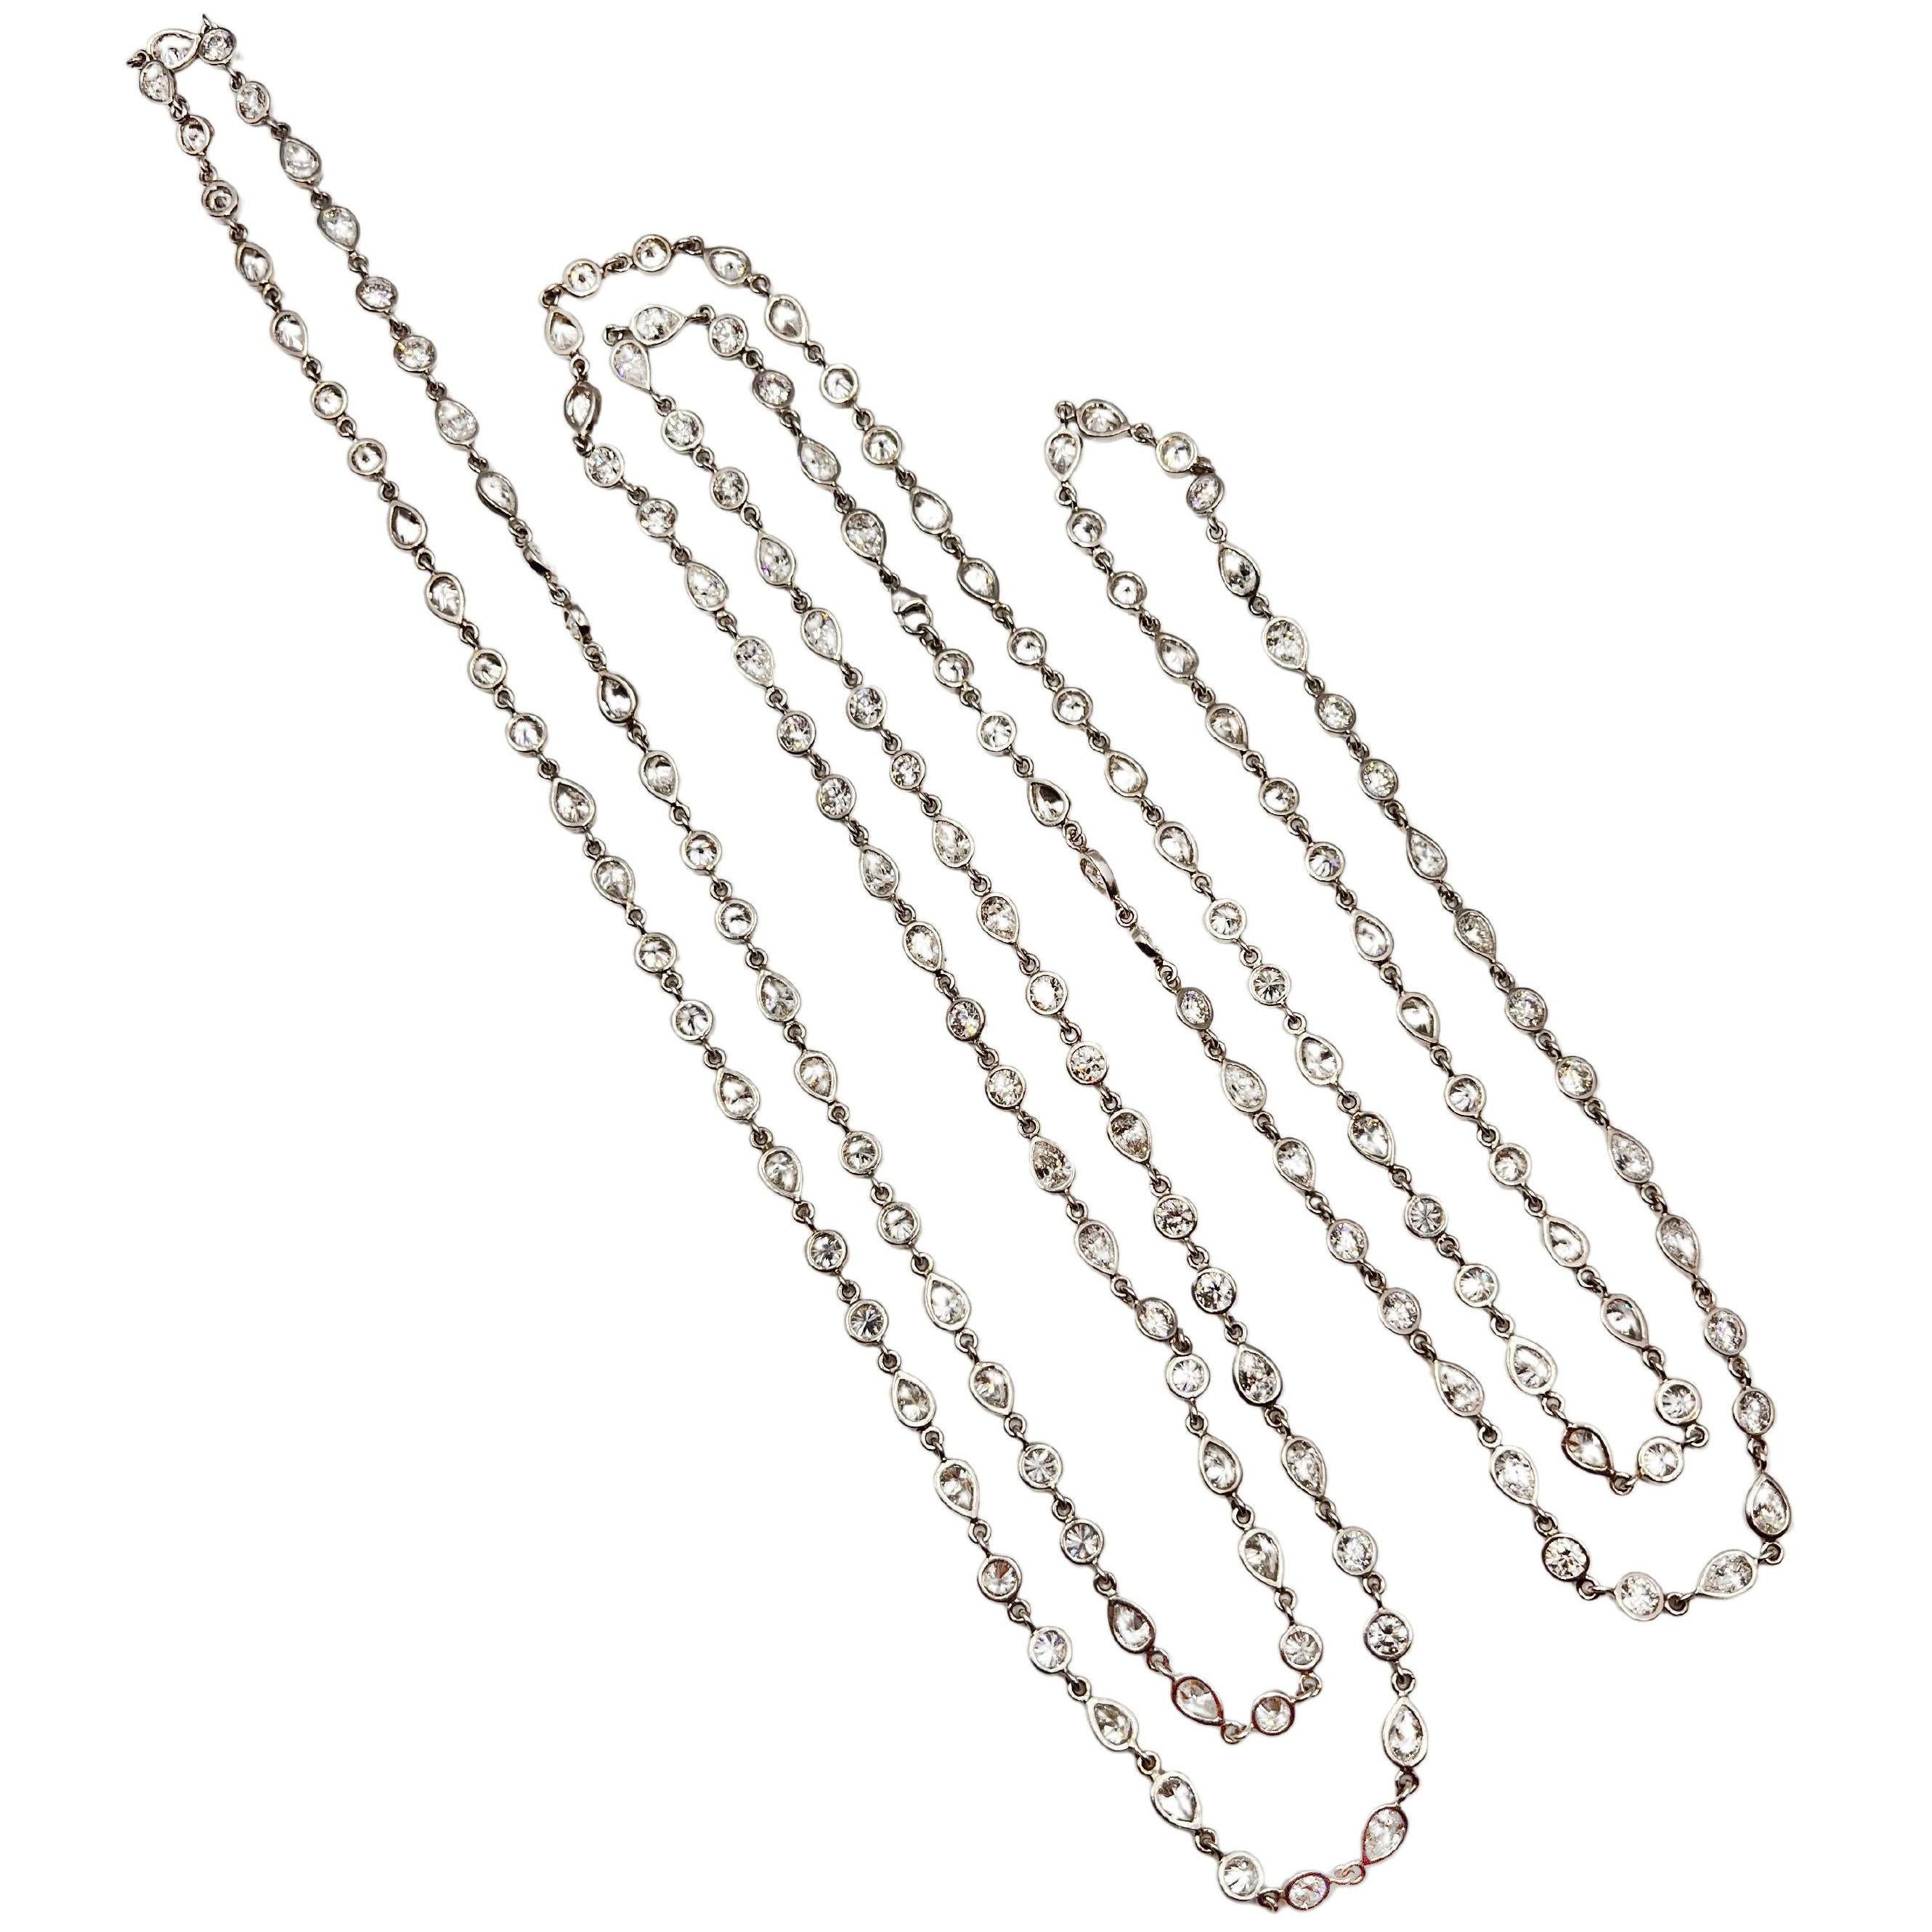 Diamonds-by-the-yard long chain necklace, featuring fine natural pear-shaped and round brilliant-cut diamonds.  The diamonds are all bezel-set in polished platinum.  82 pear brilliant-cut diamonds weighing approximately 26.10 total carats and 82